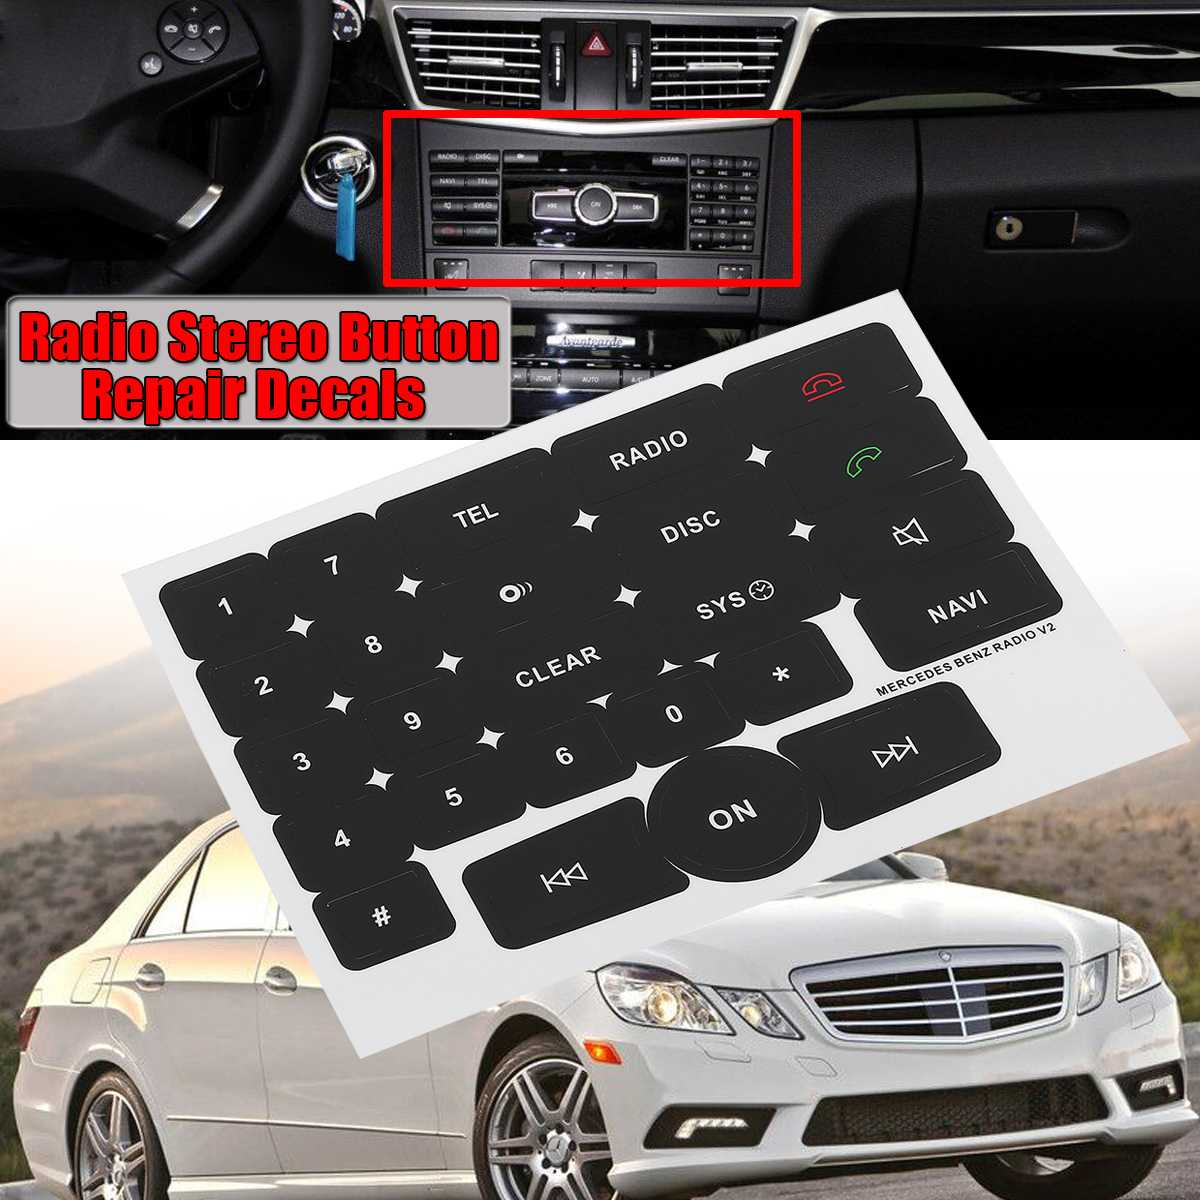 https://kiwicarparts.co.nz/cdn/shop/products/Black-Car-Media-Radio-Stereo-Button-Repair-Decals-Stickers-For-Mercedes-For-Benz-Radio-V2-Repair.jpg?crop=center&height=2048&v=1570382740&width=2048